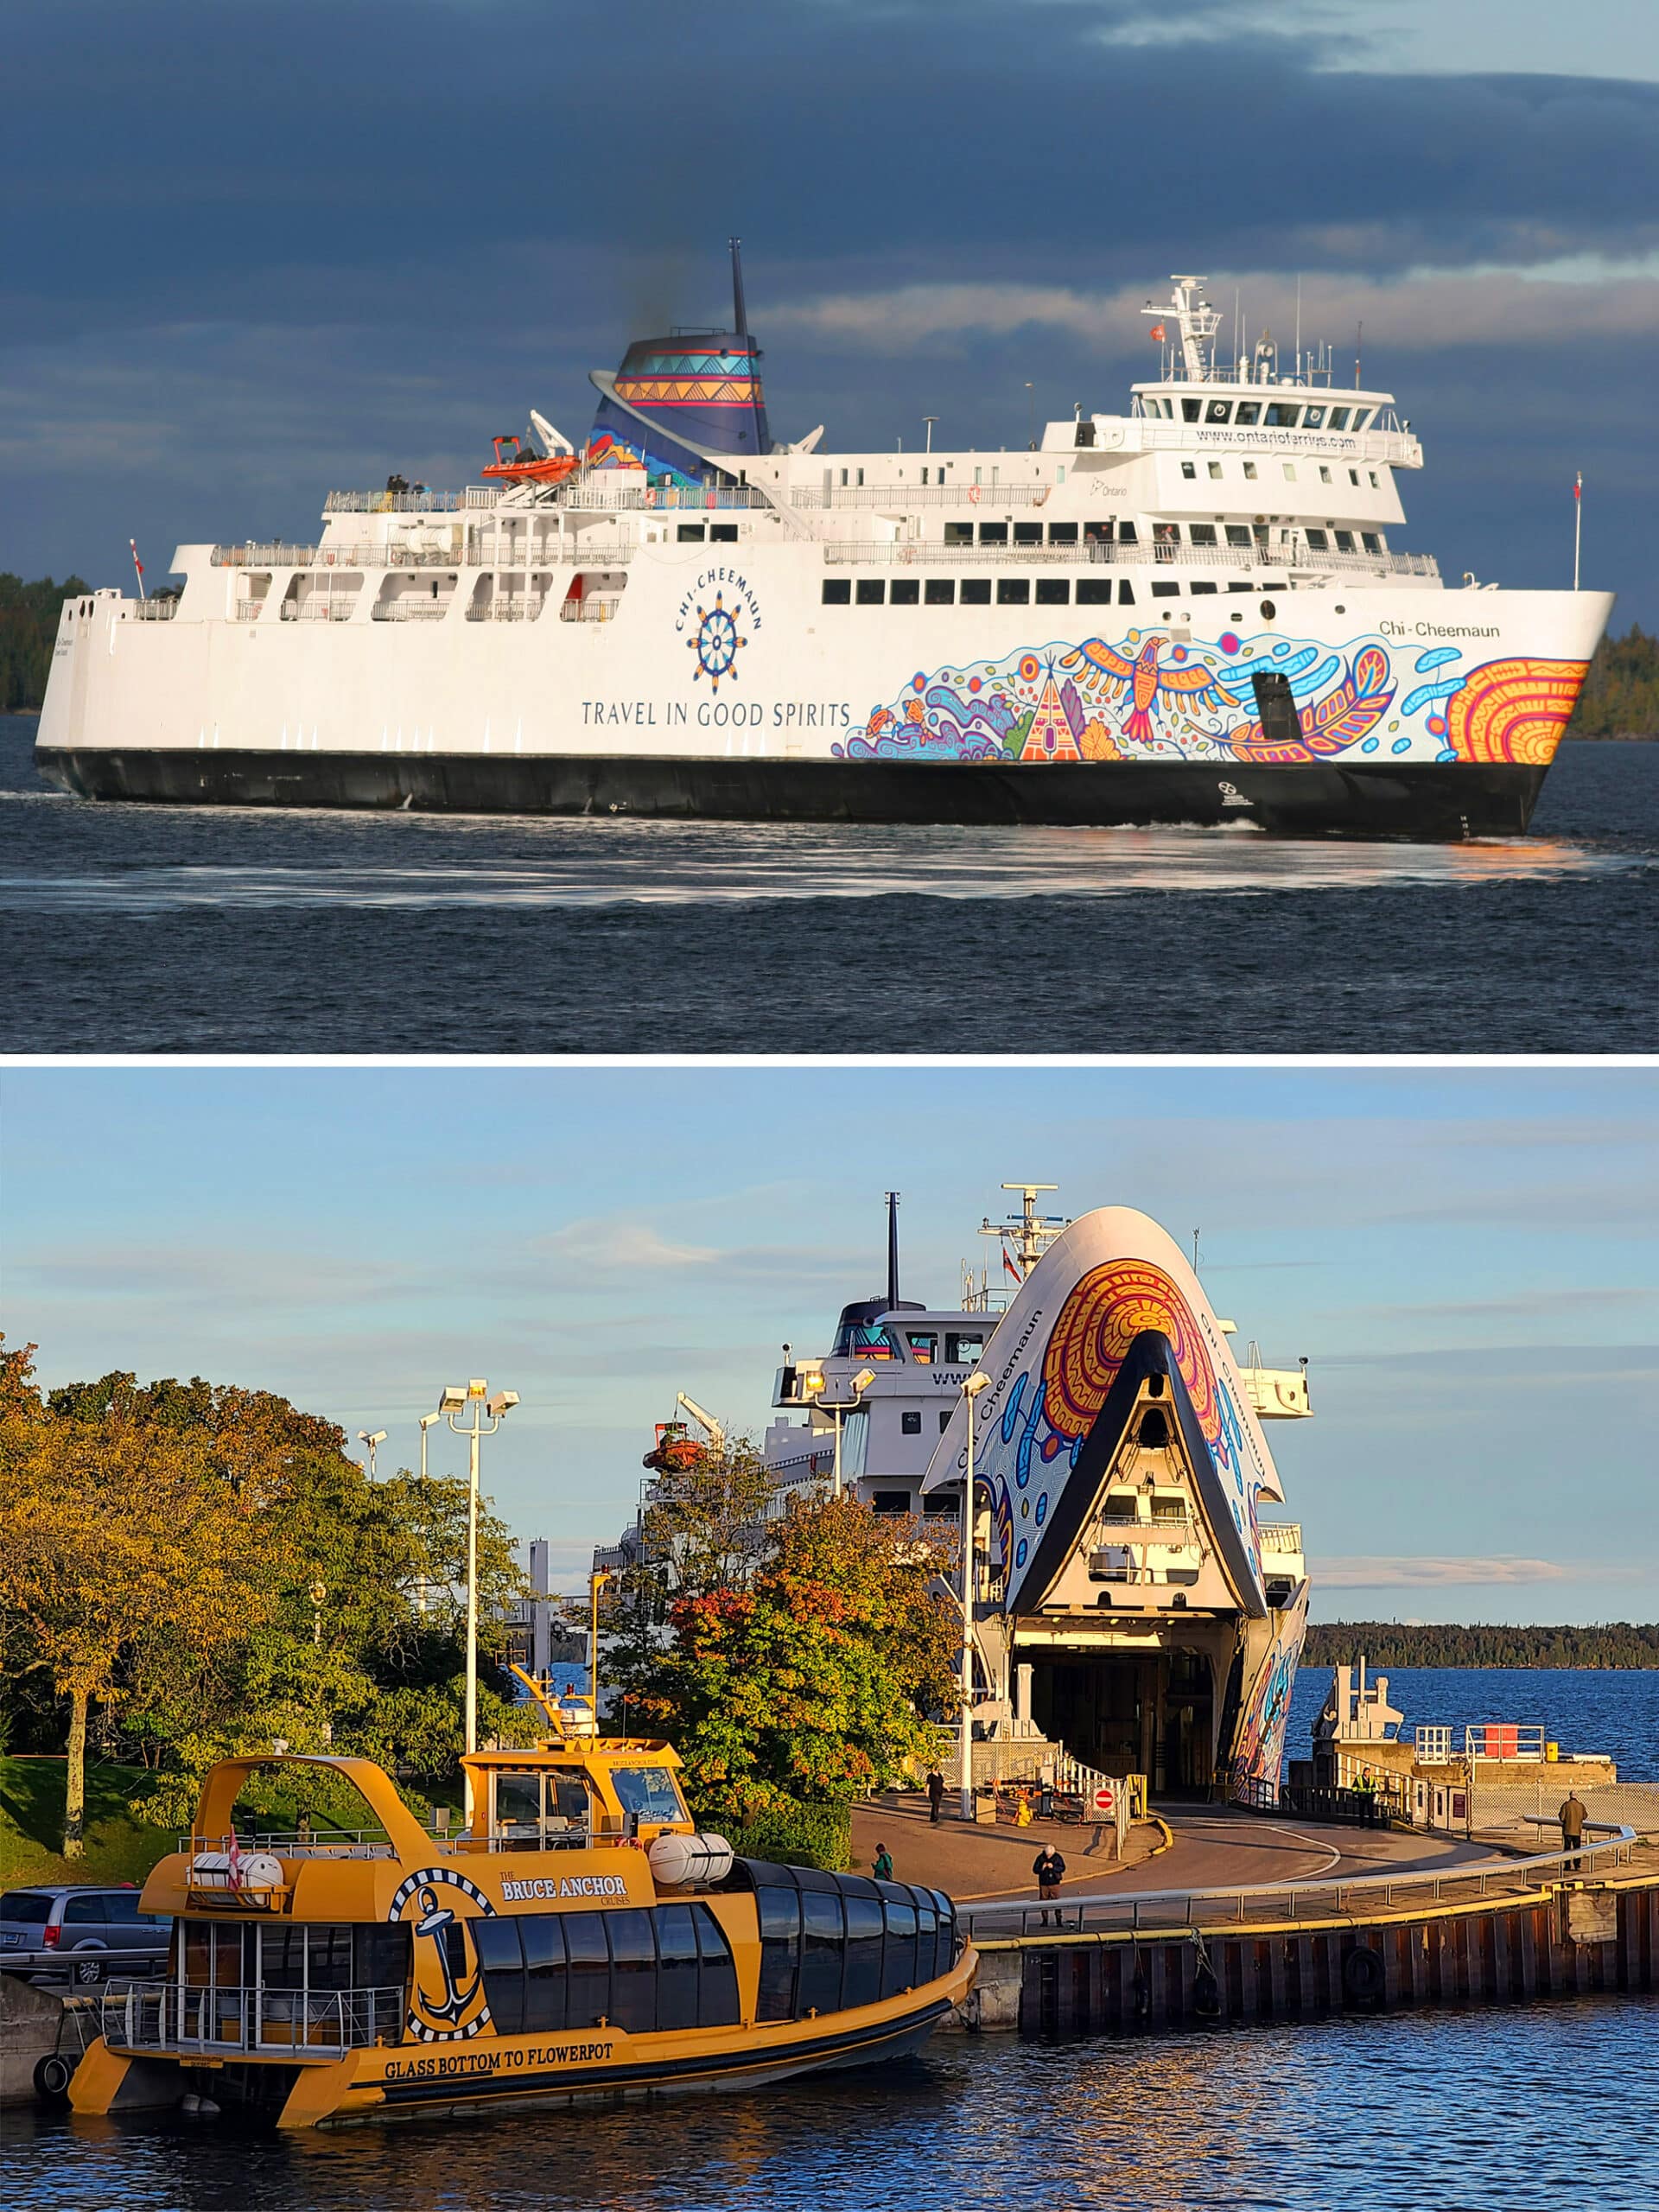 2 part image showing a large ferry painted with colourful Ojibwe art, sailing on Georgian Bay, and loading passengers at the dock.